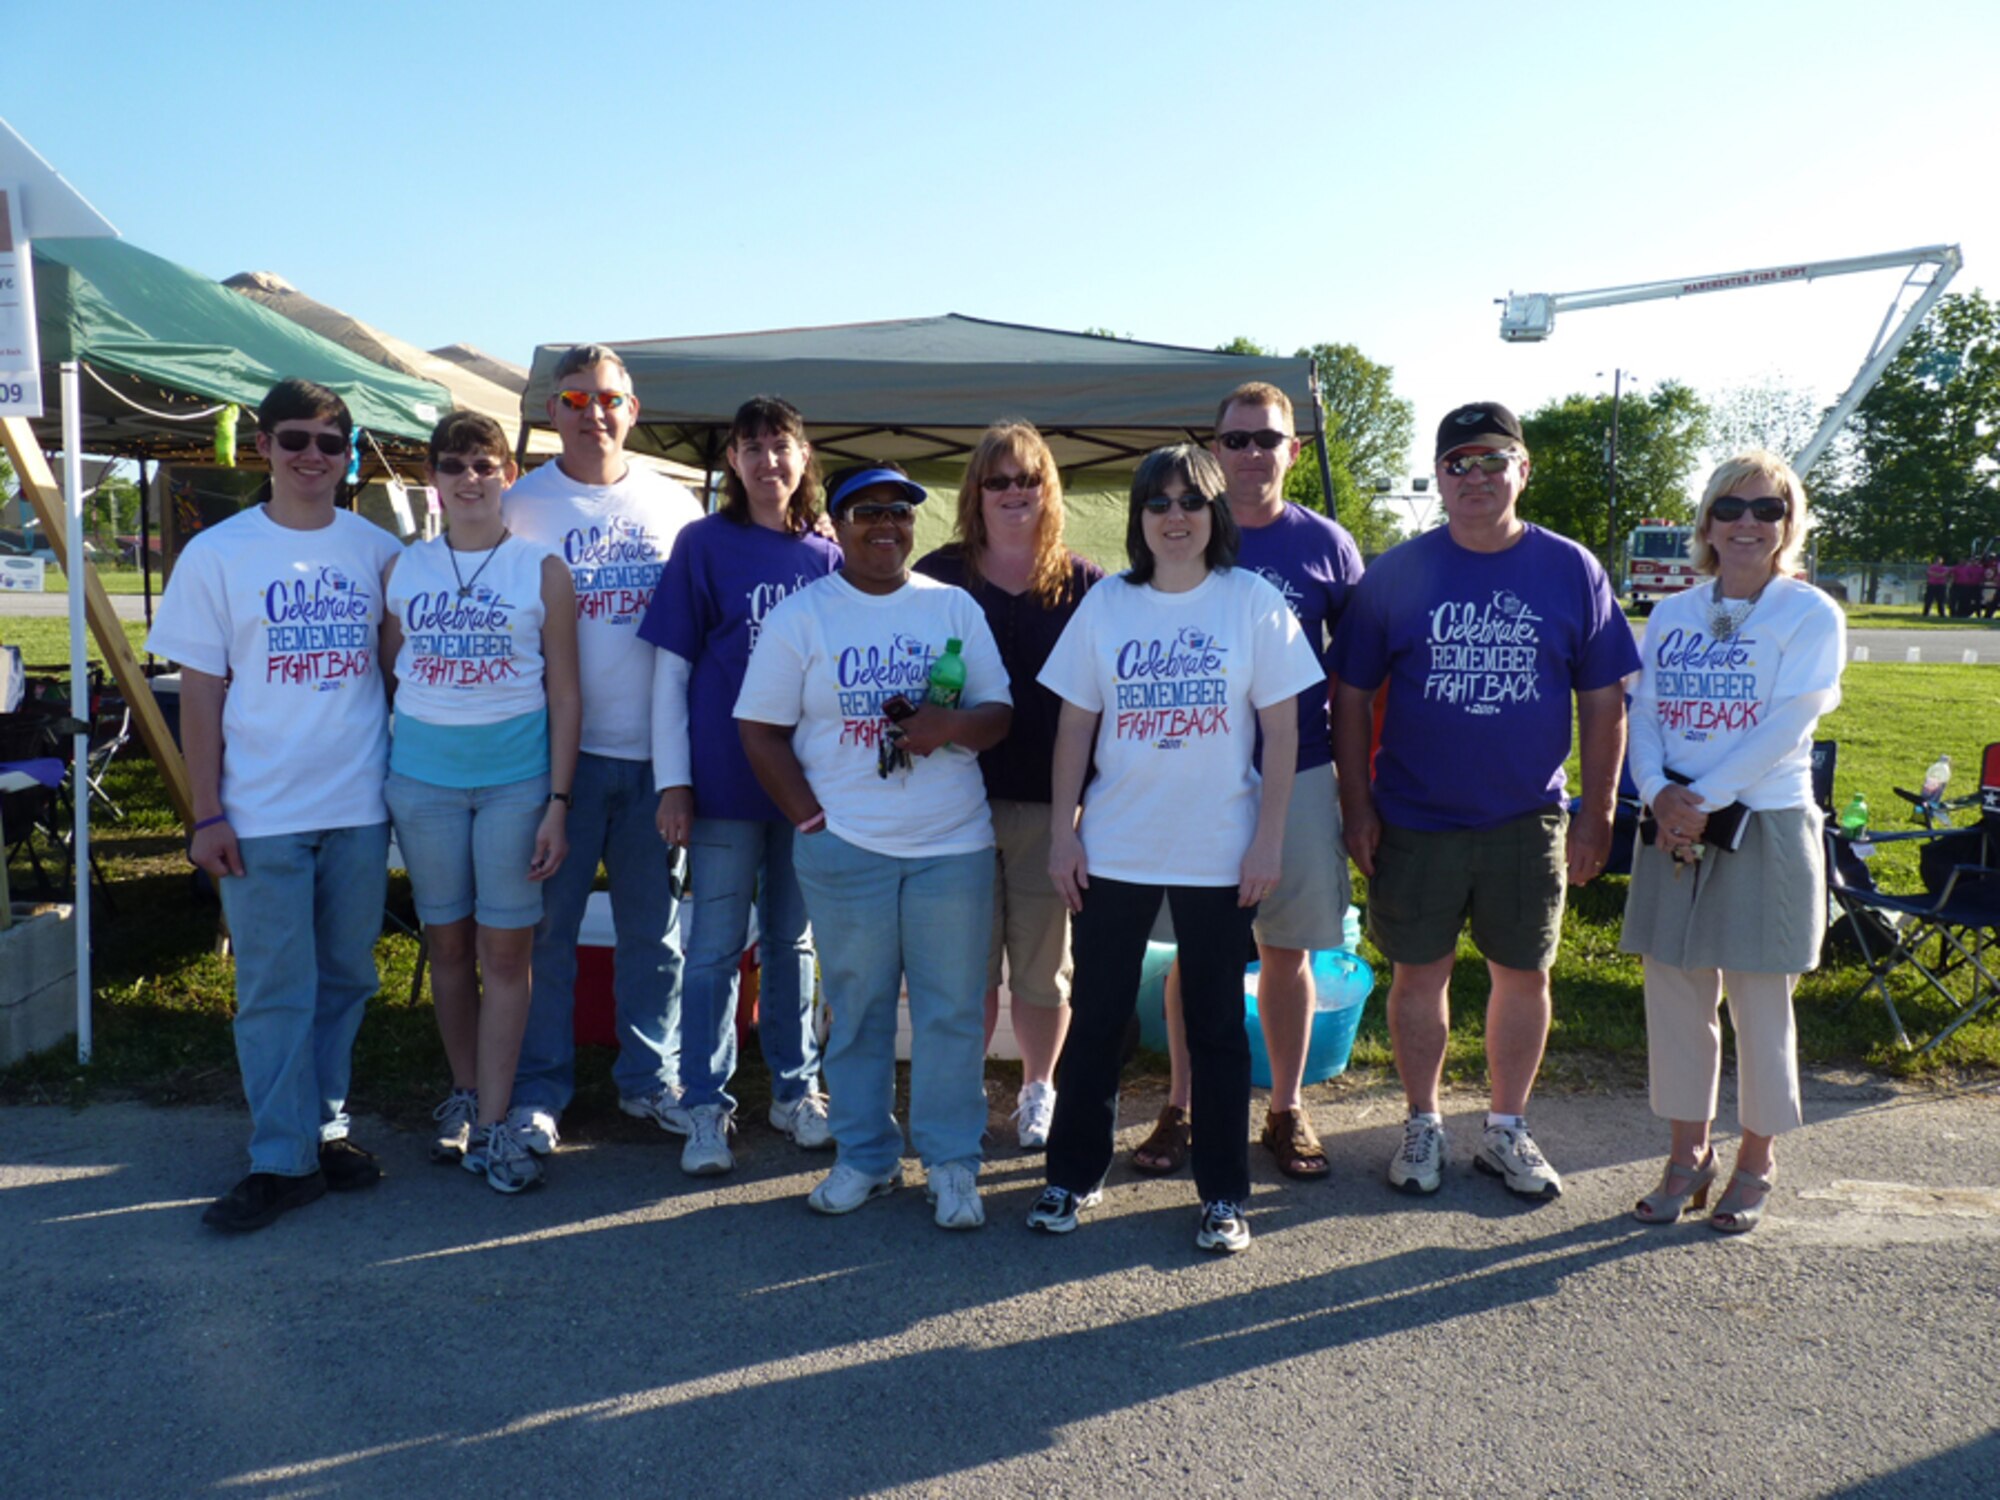 AEDC’s “Remember” team at the annual Relay for Life April 29 consisted of Scott Tucker, Amber Wolfe, Shawn Wolfe, Dee Wolfe, Danita Harvey, Tanya Haggard, Donna Paredez, Bryan Larson, Rick Ferrebee and Kathy Swanson. (Photo provided)